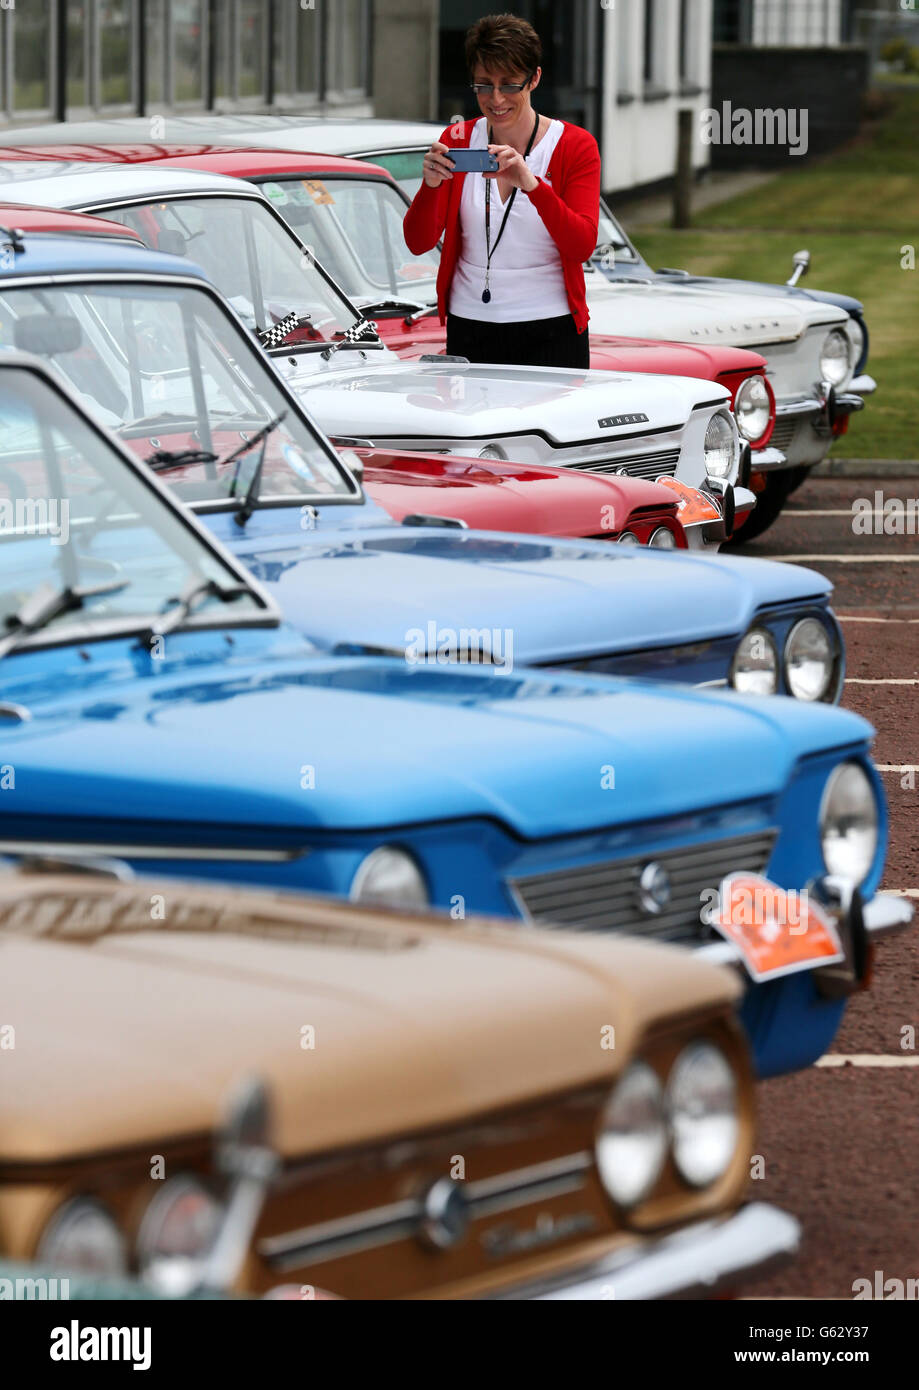 Car enthusiast Audrey Paton views Hillman Imp cars as they prepare to leave by convoy, the site of the former factory in Linwood to mark the 50th anniversary of the first Hillman Imp car made at the Rootes car plant. Stock Photo